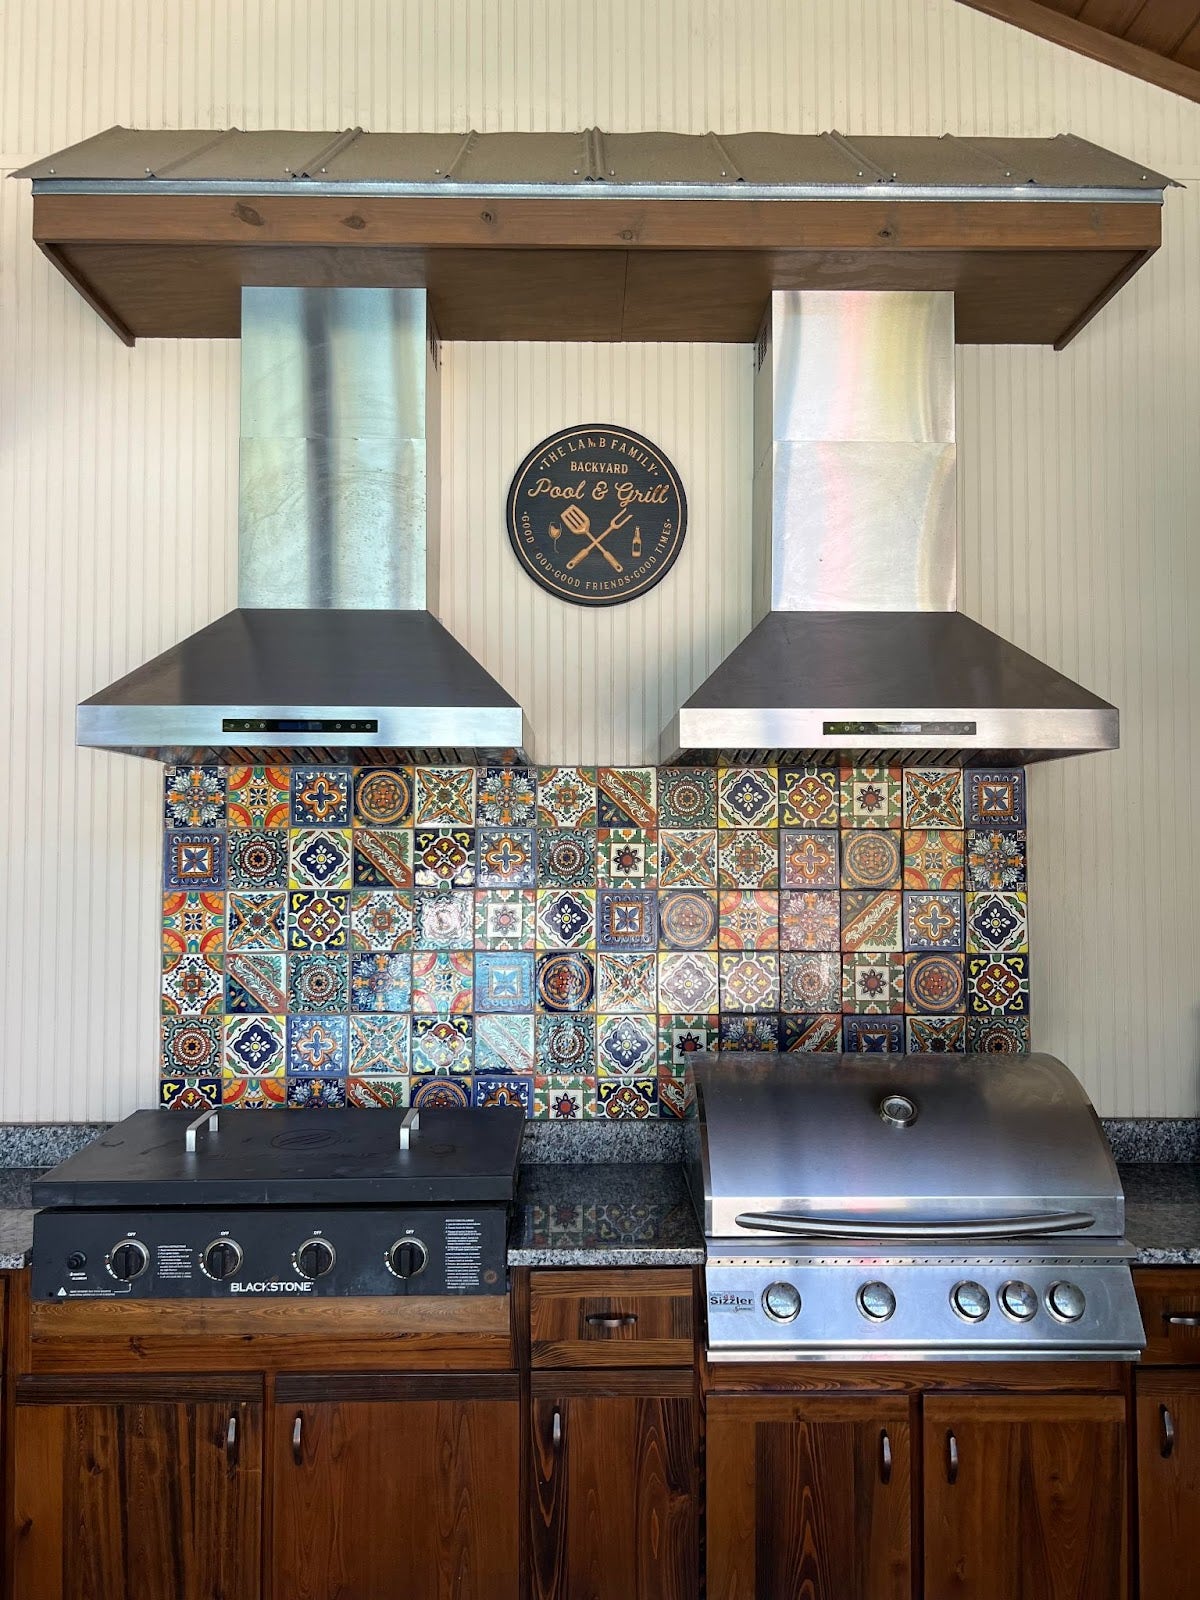 Outdoor kitchen featuring a Blackstone flat-top grill and Sizzler grill with stainless steel exhaust hoods and colorful backsplash tiles - Proline Range Hoods - prolinerangehoods.com 